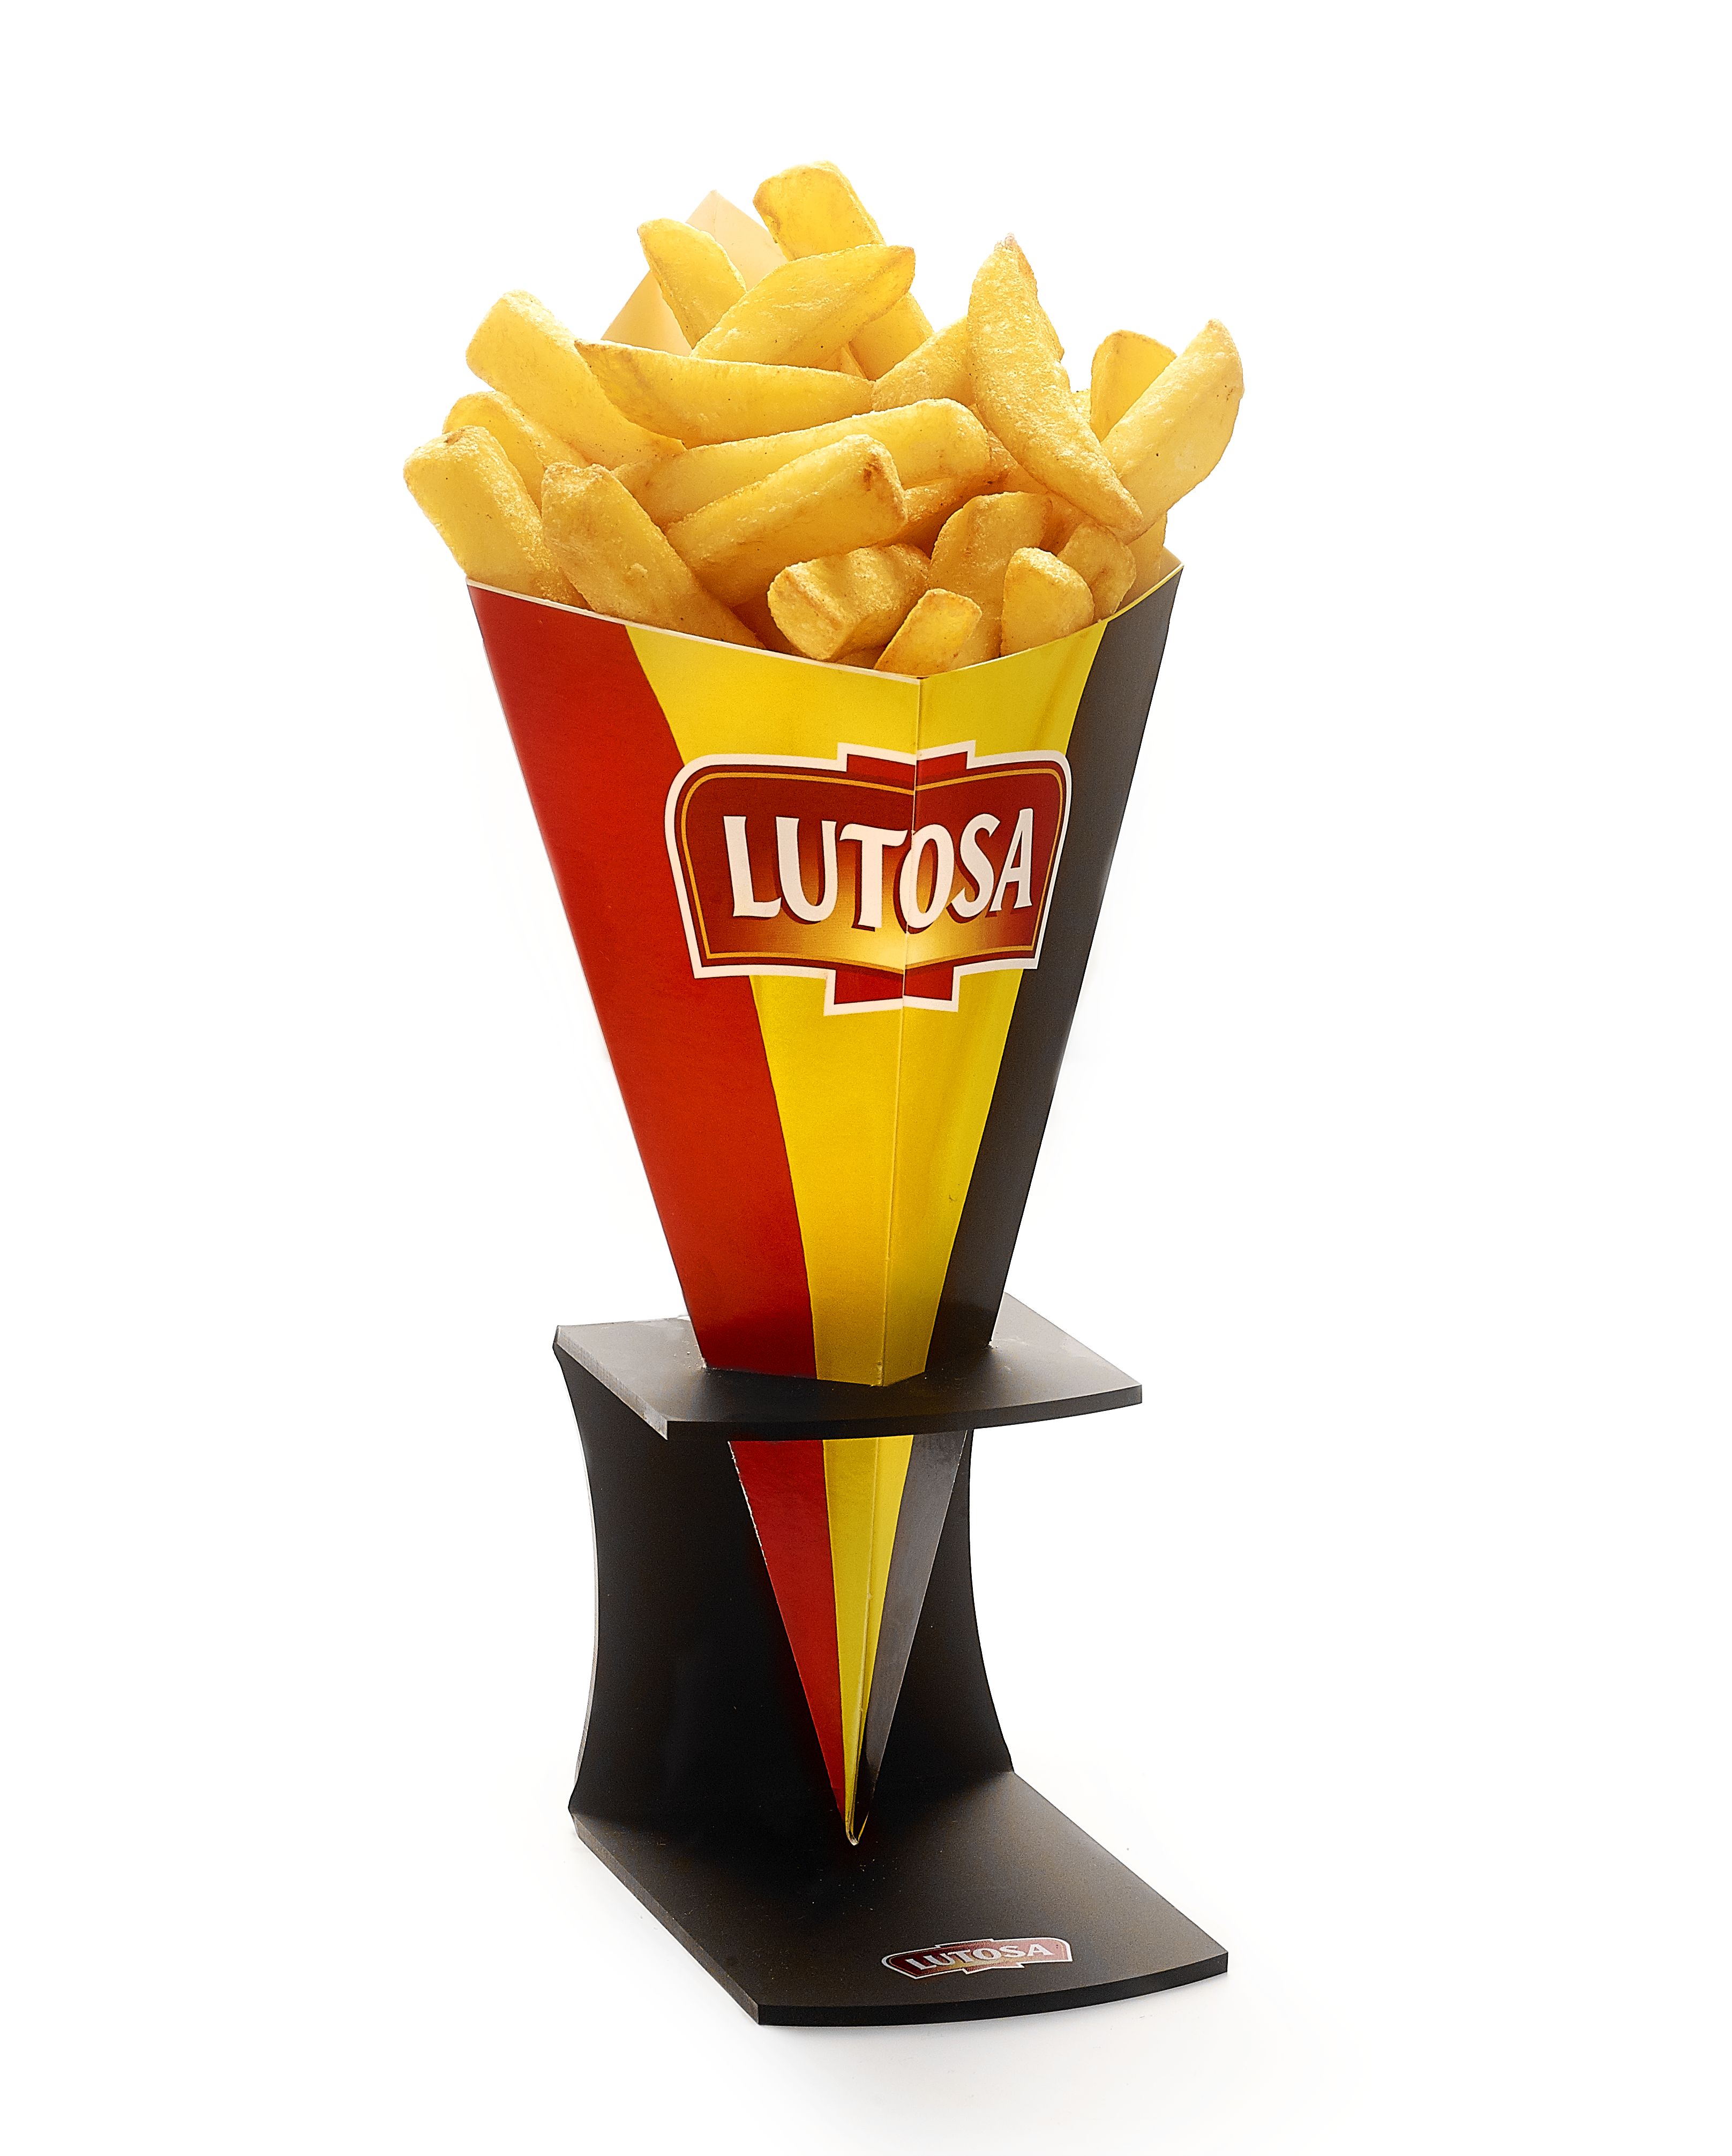 3D fries bags,french fries, frenchfries, belgian fries, chip bag, french fries Lutosa, chip bac lutasa, Lutosa advertising,Lutosa eyecatcher, french fries in polyester, frnch fries in fiberglass, fiberglass french fries, decoration for trade show, advertising props, advertising object, promotional item,advertising campagne,prop, original prop, blowups, blow ups